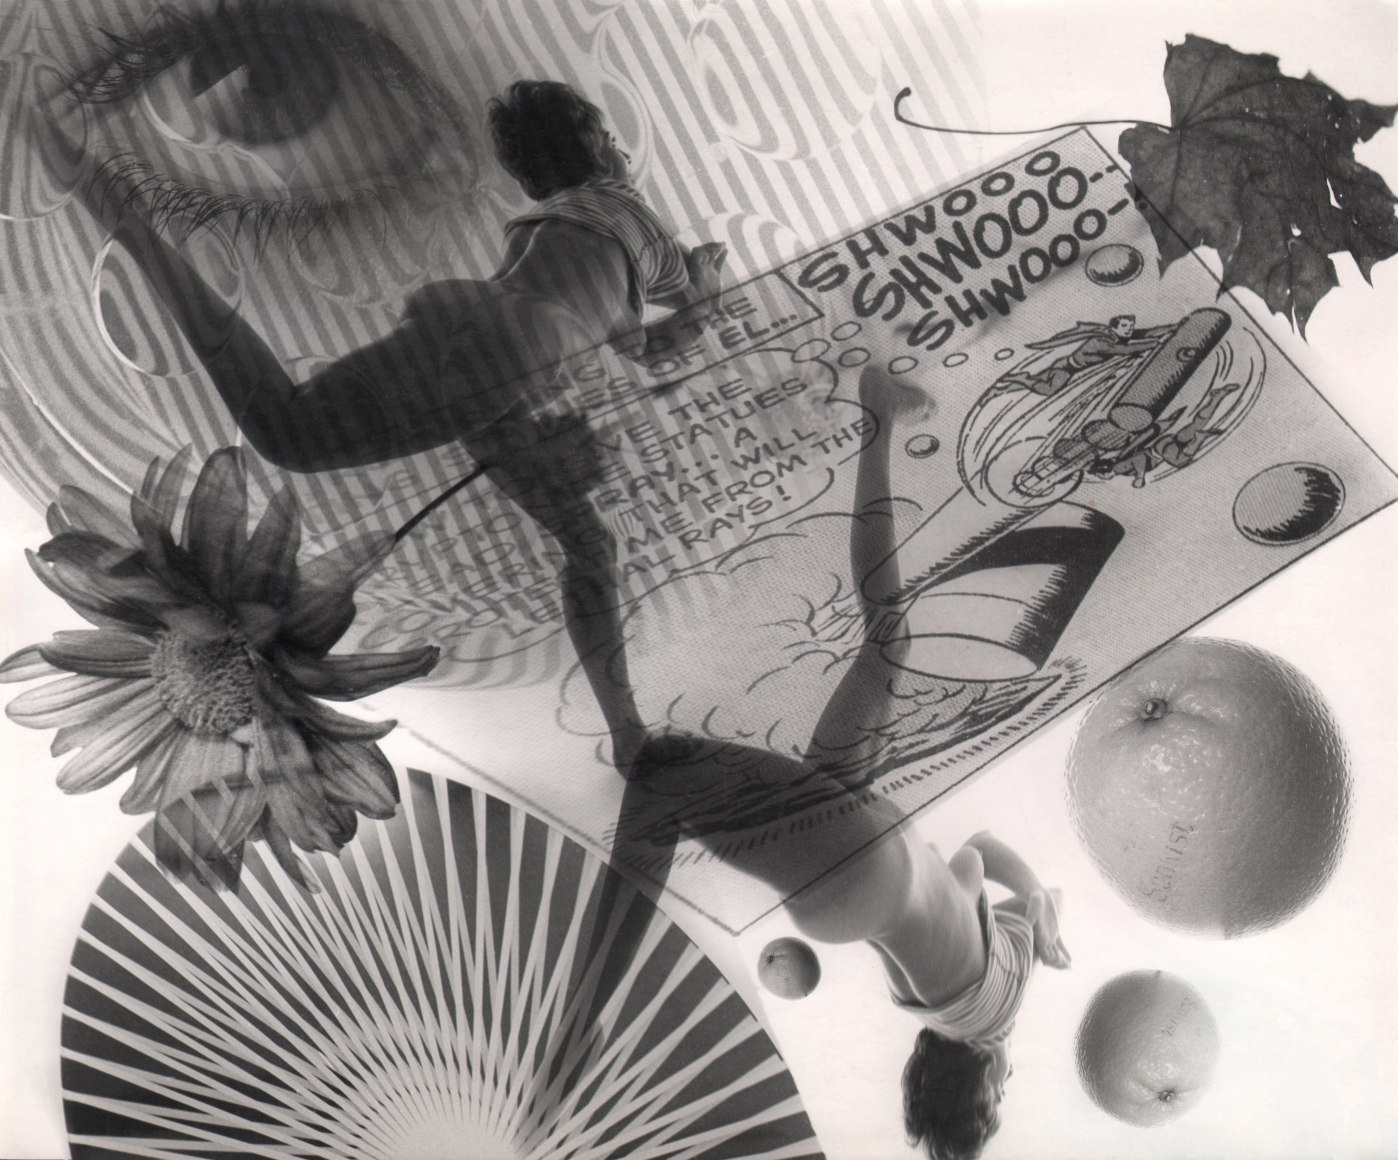 17. David Attie, Untitled Montage, c. 1965. Composite photo featuring two images of a woman in a leaping pose, fruits, flowers and leaves, an eye, and more.